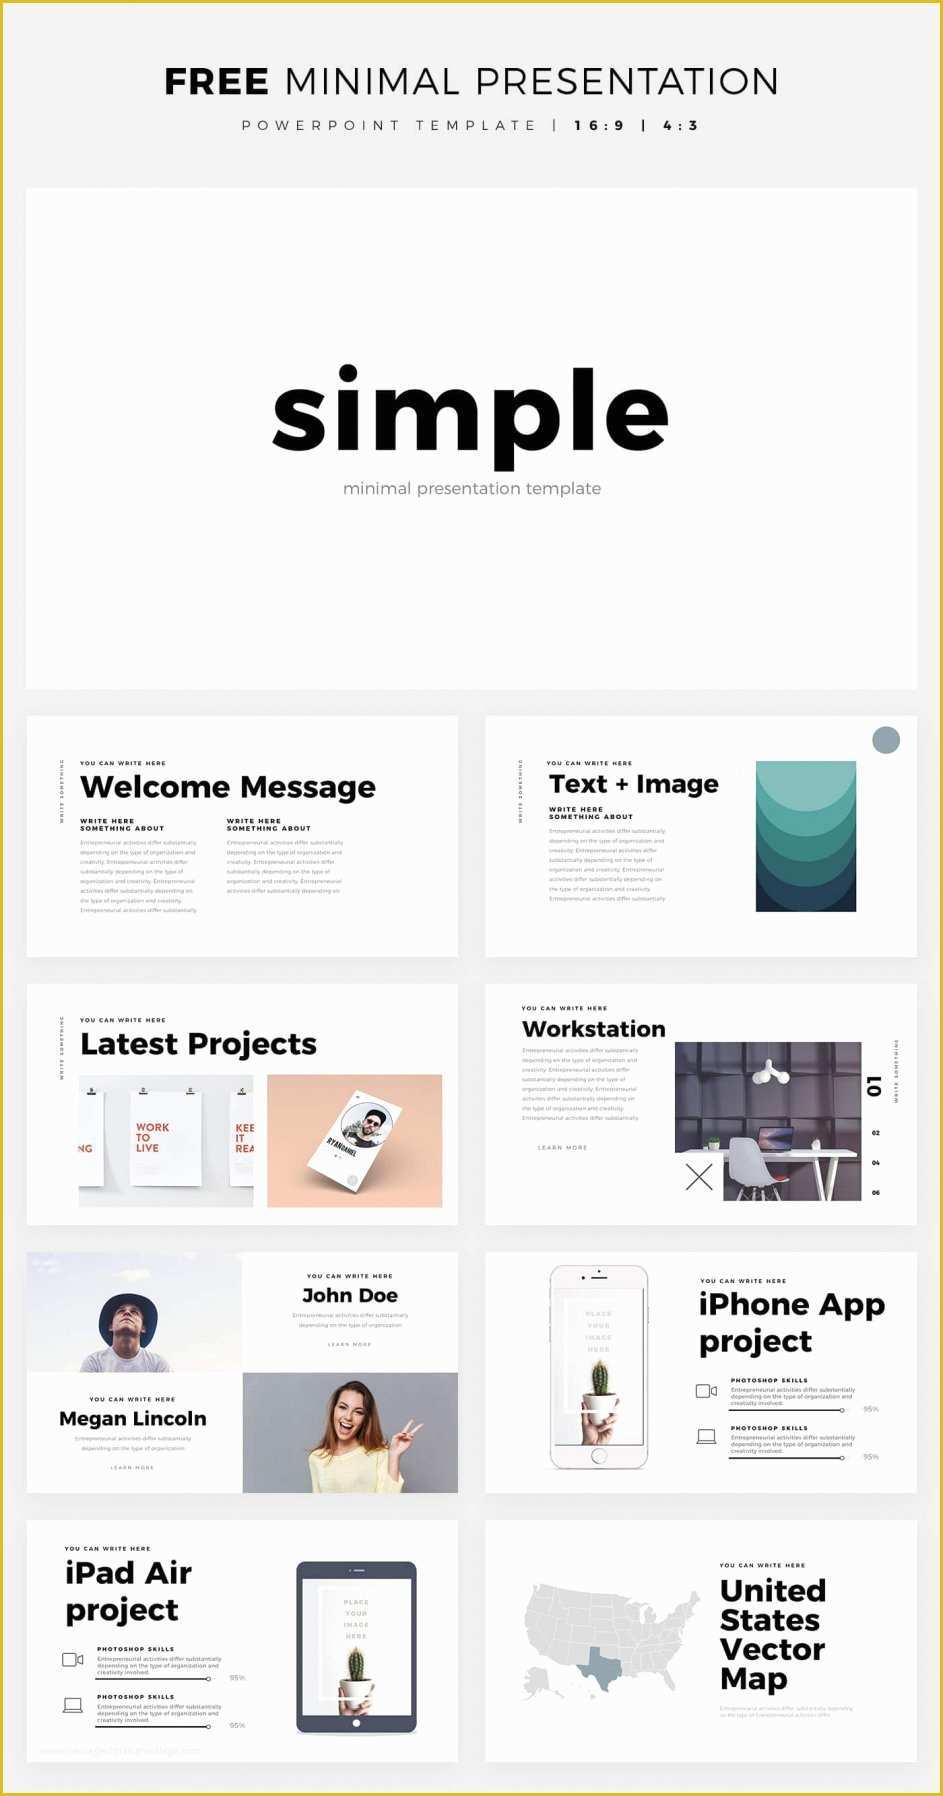 Clean Professional Powerpoint Templates Free Of 50 Best Free Cool Powerpoint Templates Of 2018 Updated